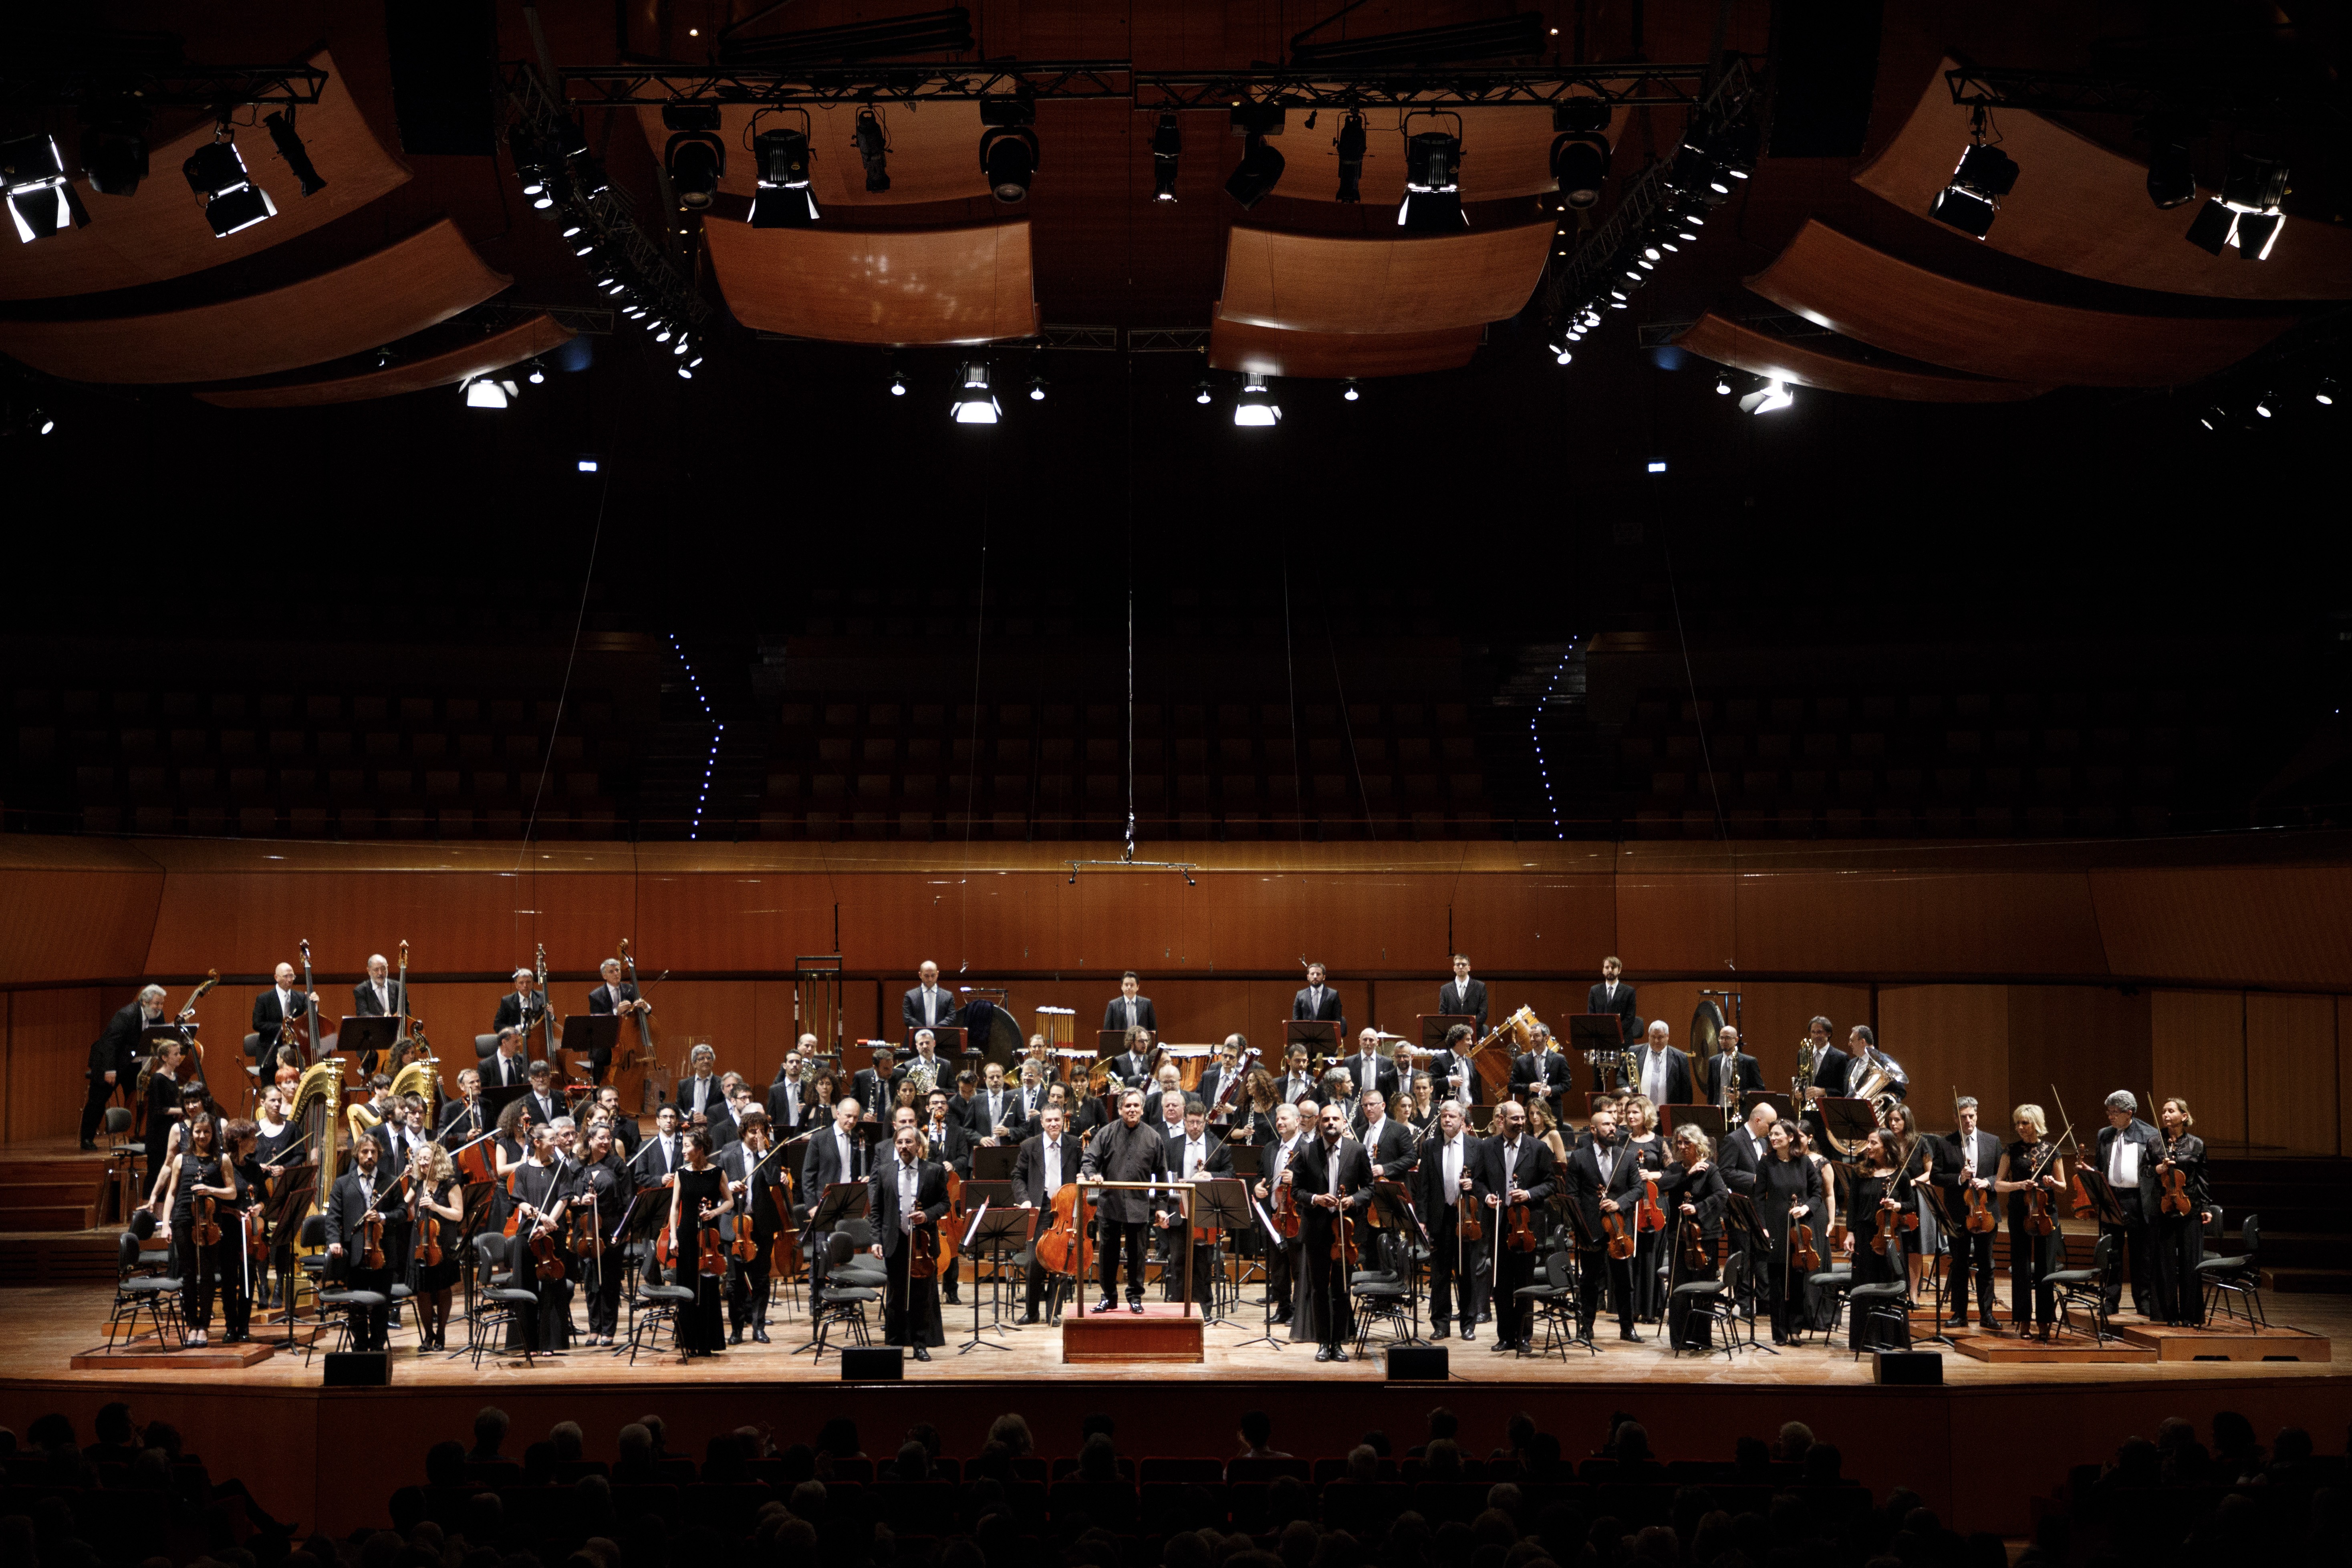 The Accademia Nazionale di Santa Cecilia’s world-famous orchestra, pictured, focuses solely on the symphonic repertoire. The ensemble is set to perform at the Concert Hall, Hong Kong Cultural Centre on November 22 and 23. Photo: Musacchio & Ianniello